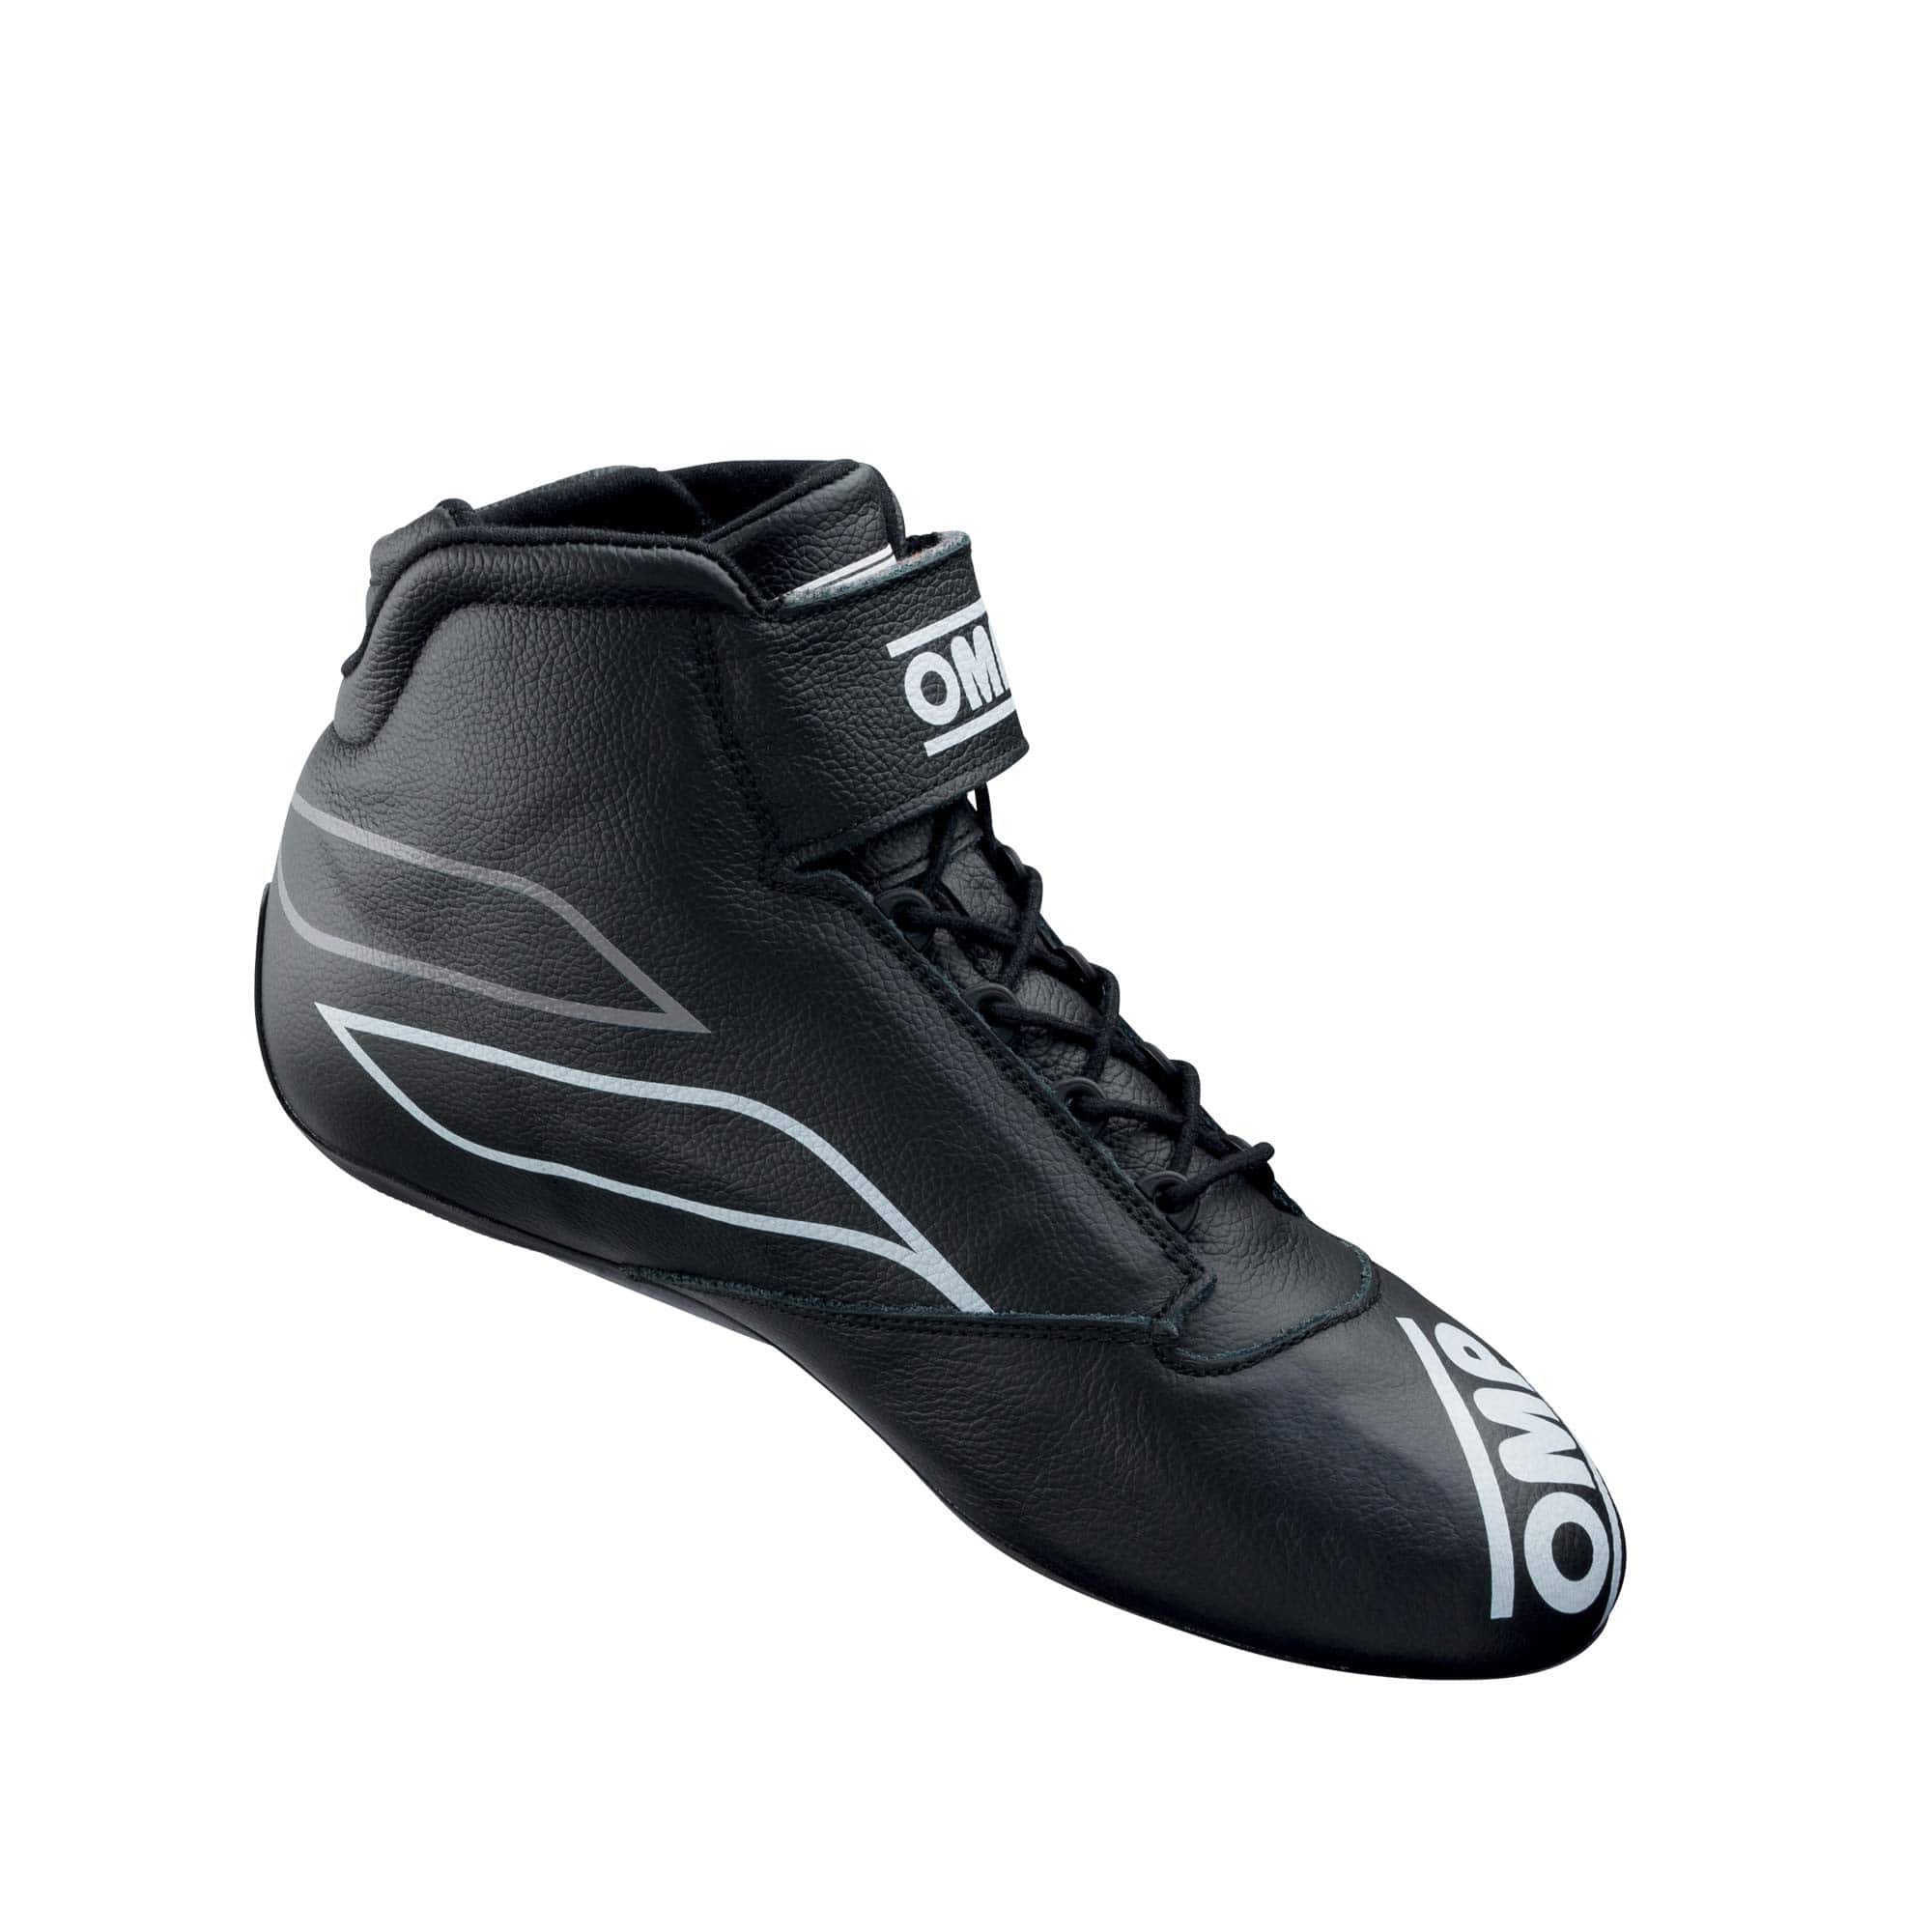 Scarpa-One-S-shoes-my2020-Black-Ic-822-rear